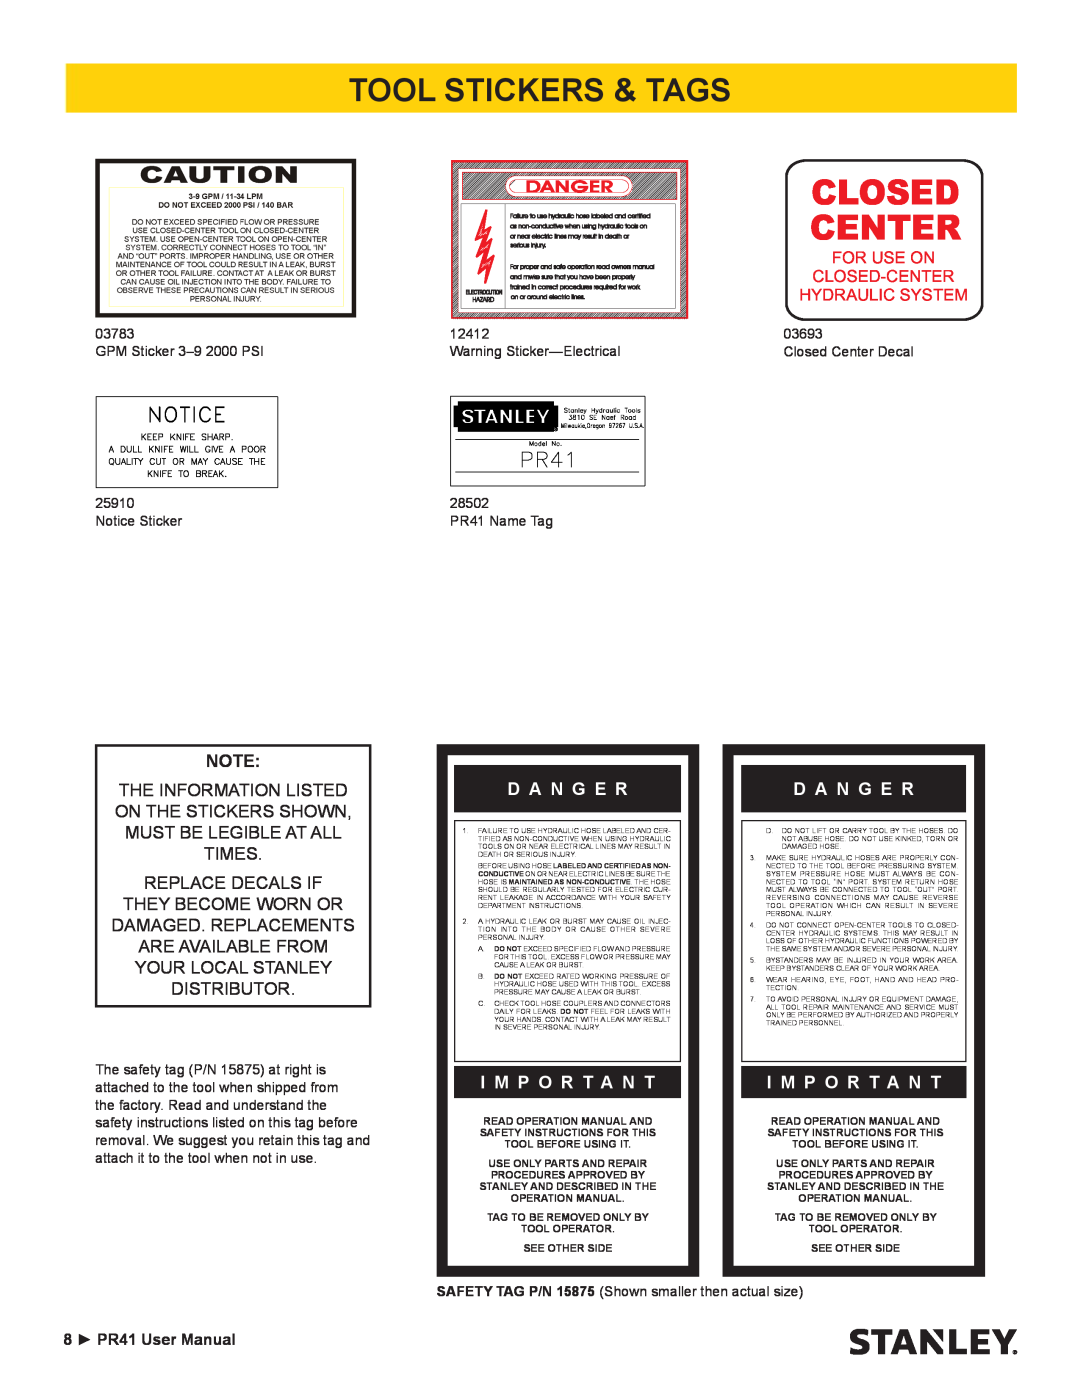 Stanley Black & Decker PR41 manual Tool Stickers & Tags, Closed Center, Danger, For Use On Closed-Center Hydraulic System 